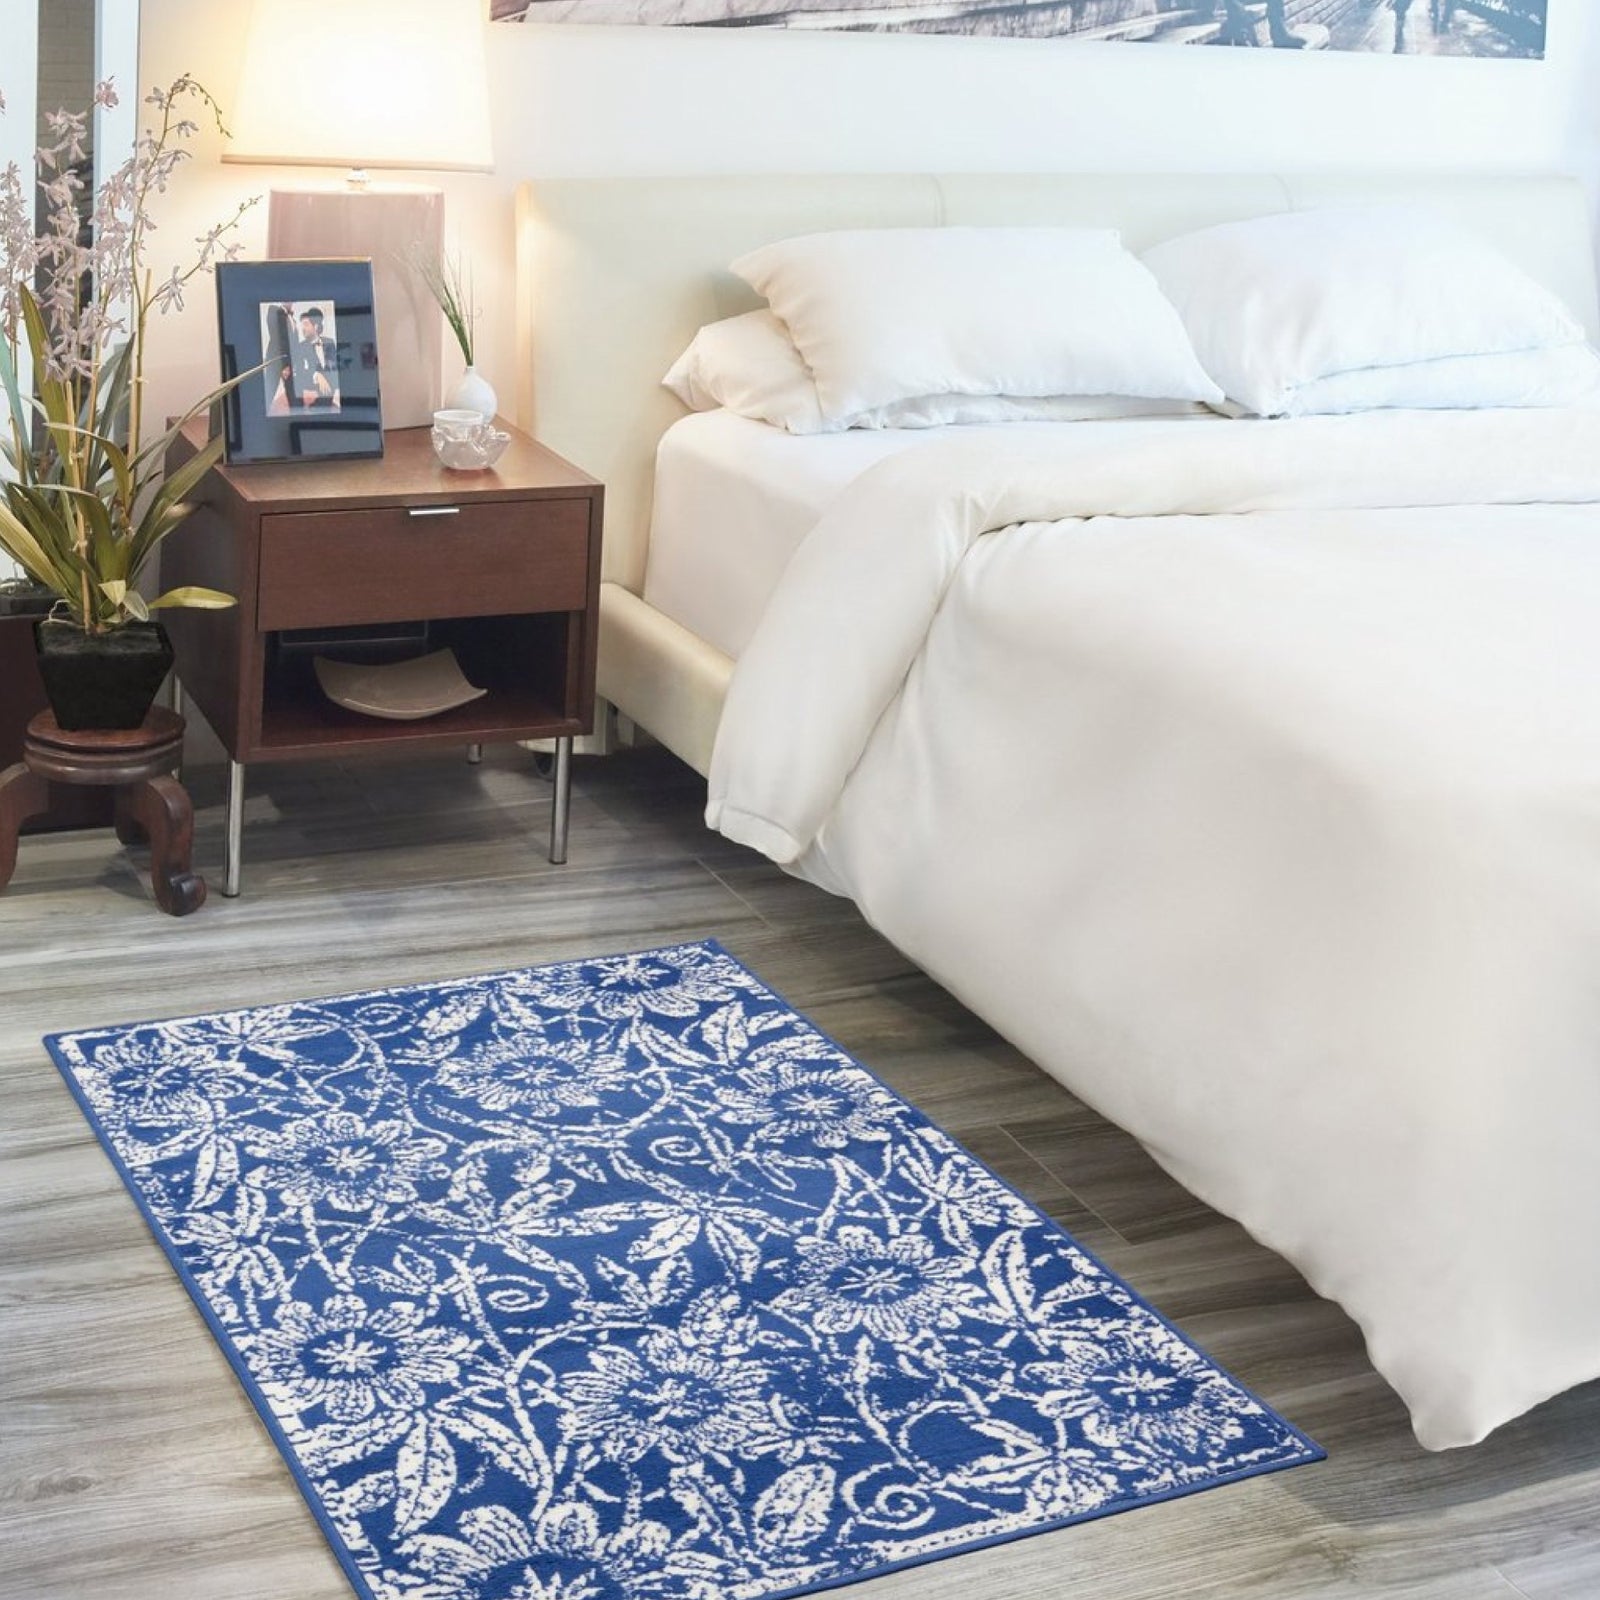 5’ X 7’ Navy And Ivory Floral Vines Area Rug